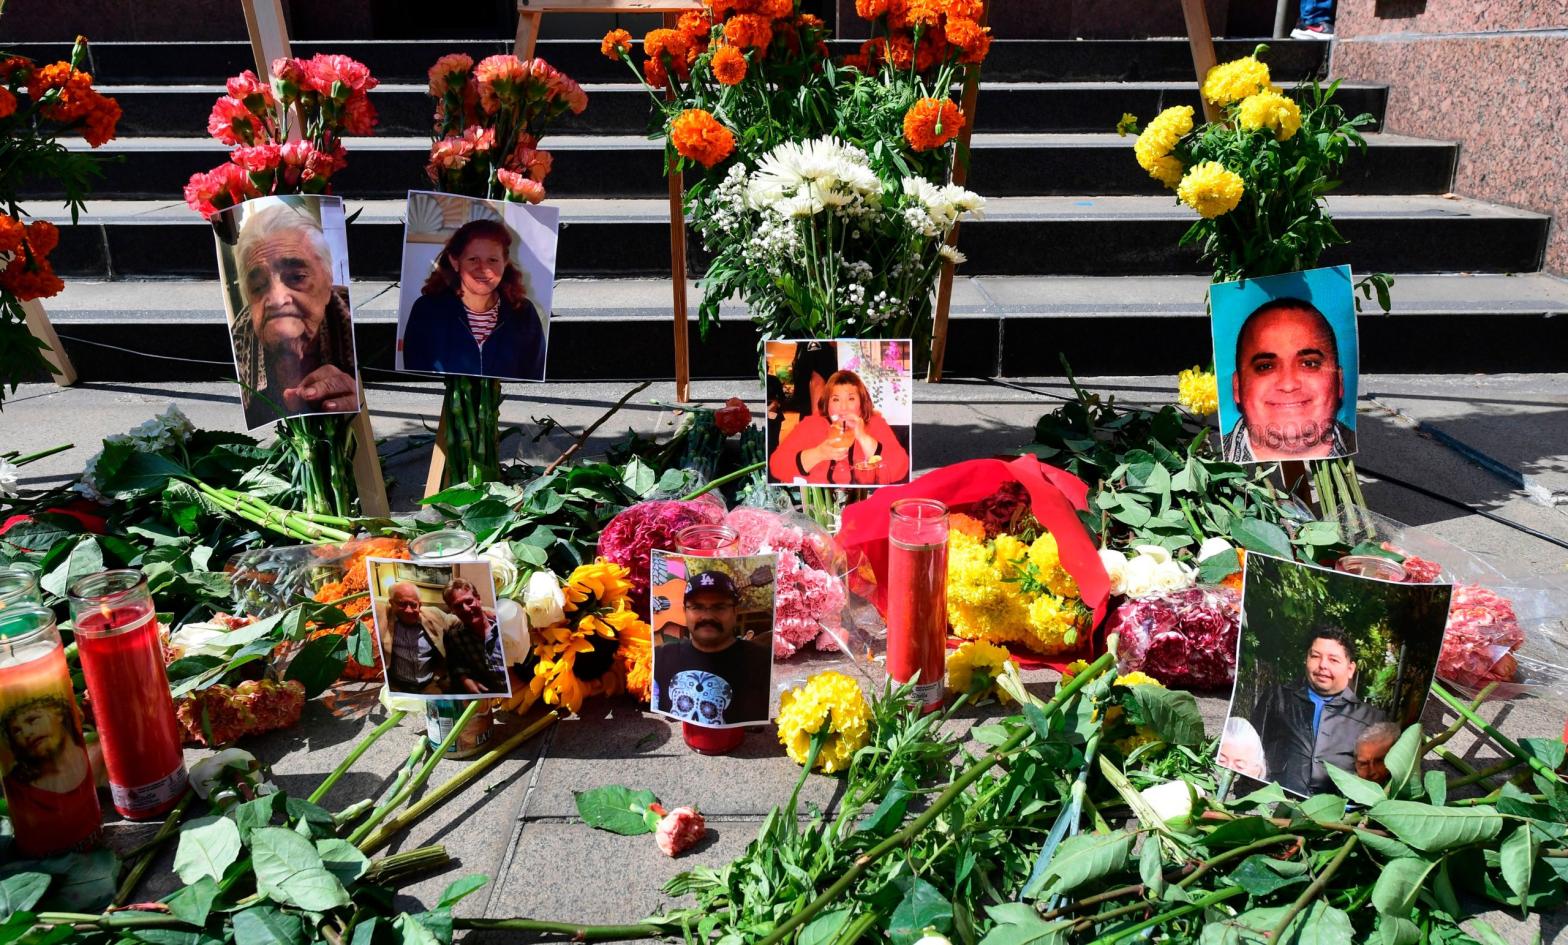 A memorial for Los Angeles victims of covid-19. (Photo: FREDERIC J. BROWN/AFP, Getty Images)